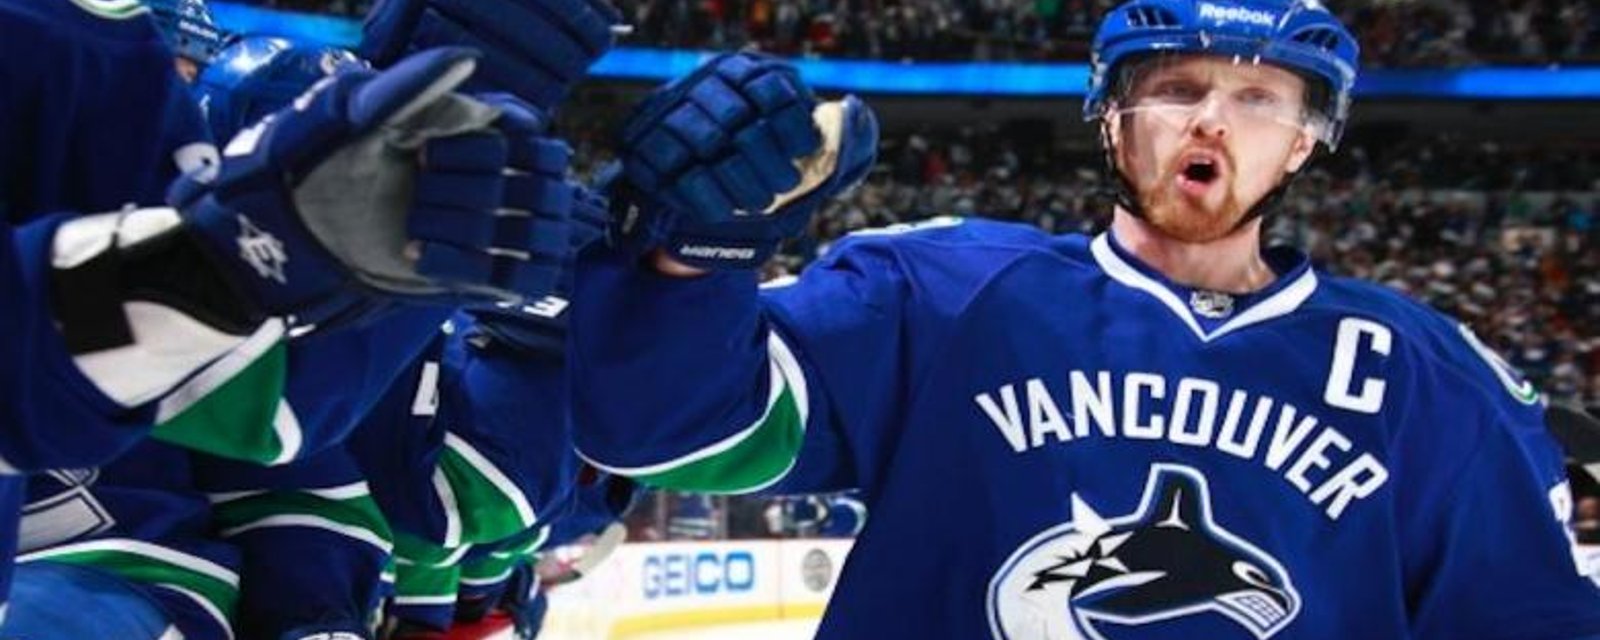 Canucks' general manager is furious with Henrik Sedin's injury.